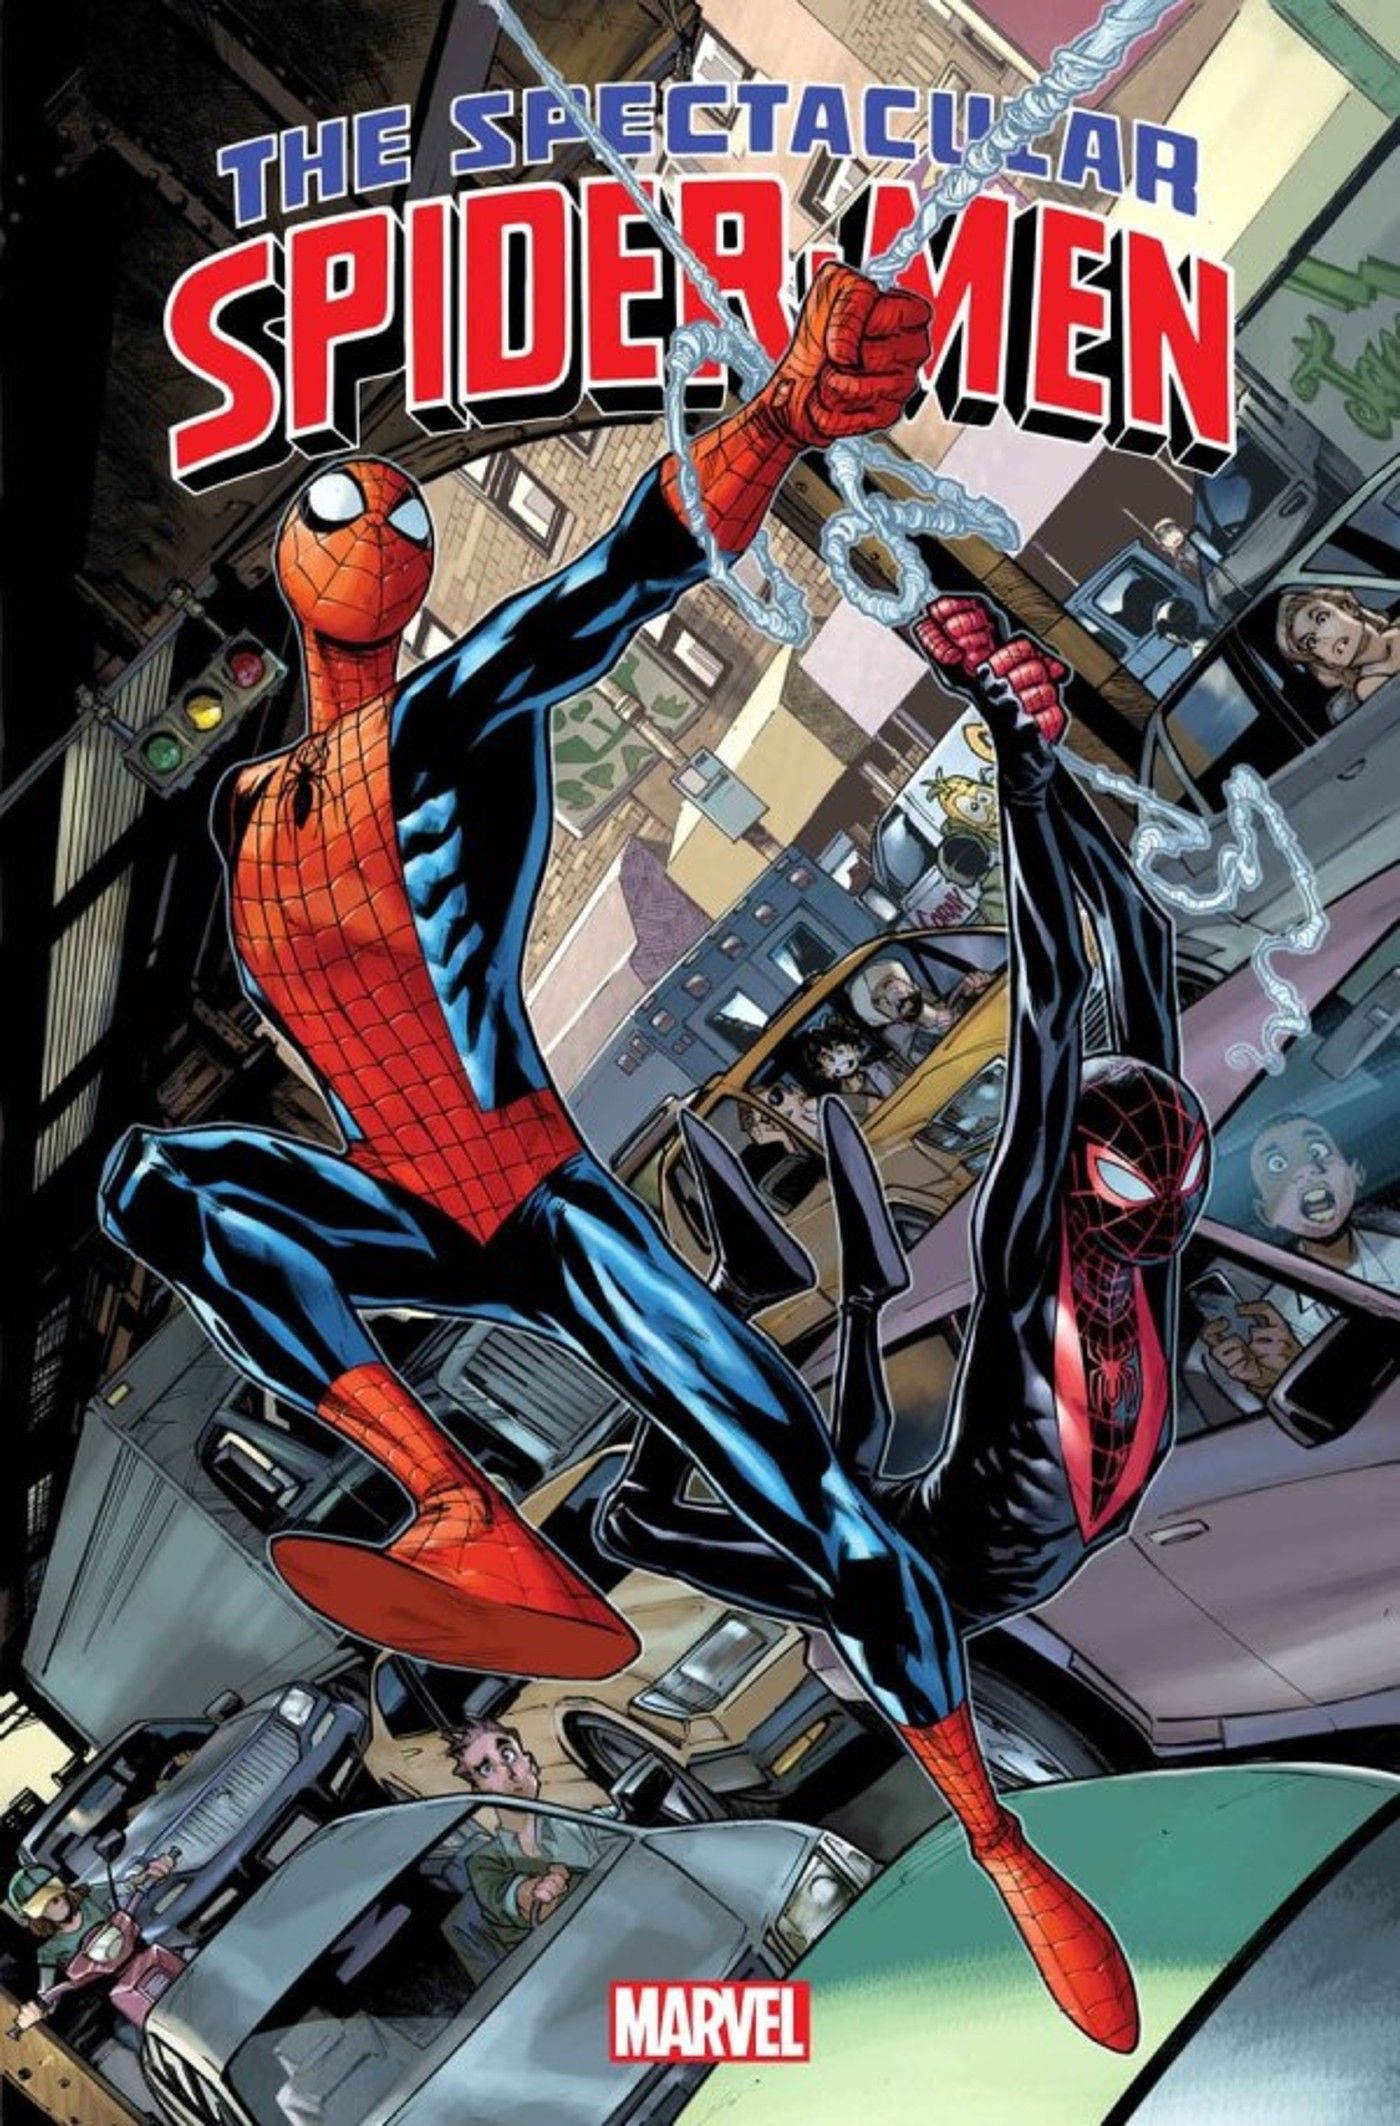 Spider-Man Heroes Undergo Official “Evolution” as Marvel Permanently Rewrites Peter & Miles’ Relationship